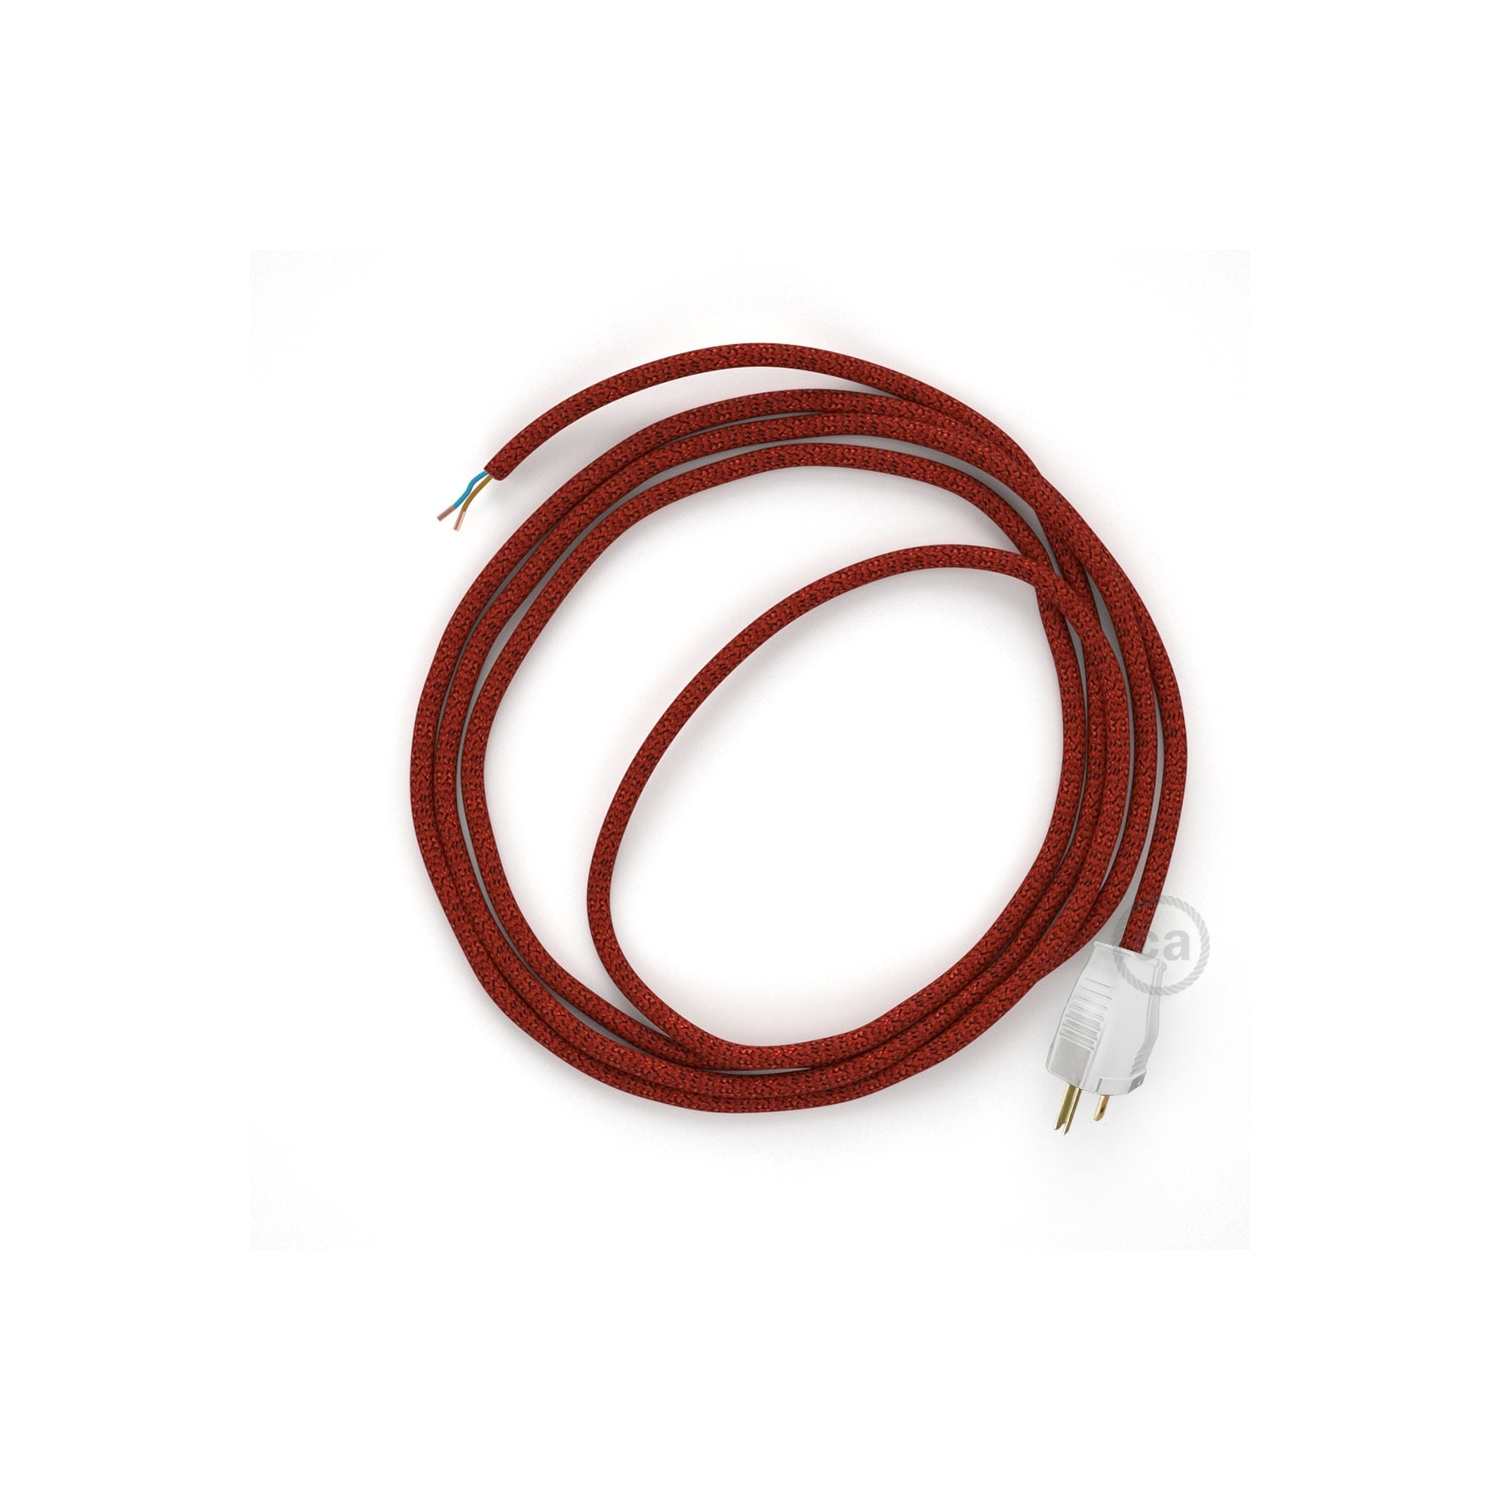 Cord-set - RL09 Red Glitter Covered Round Cable